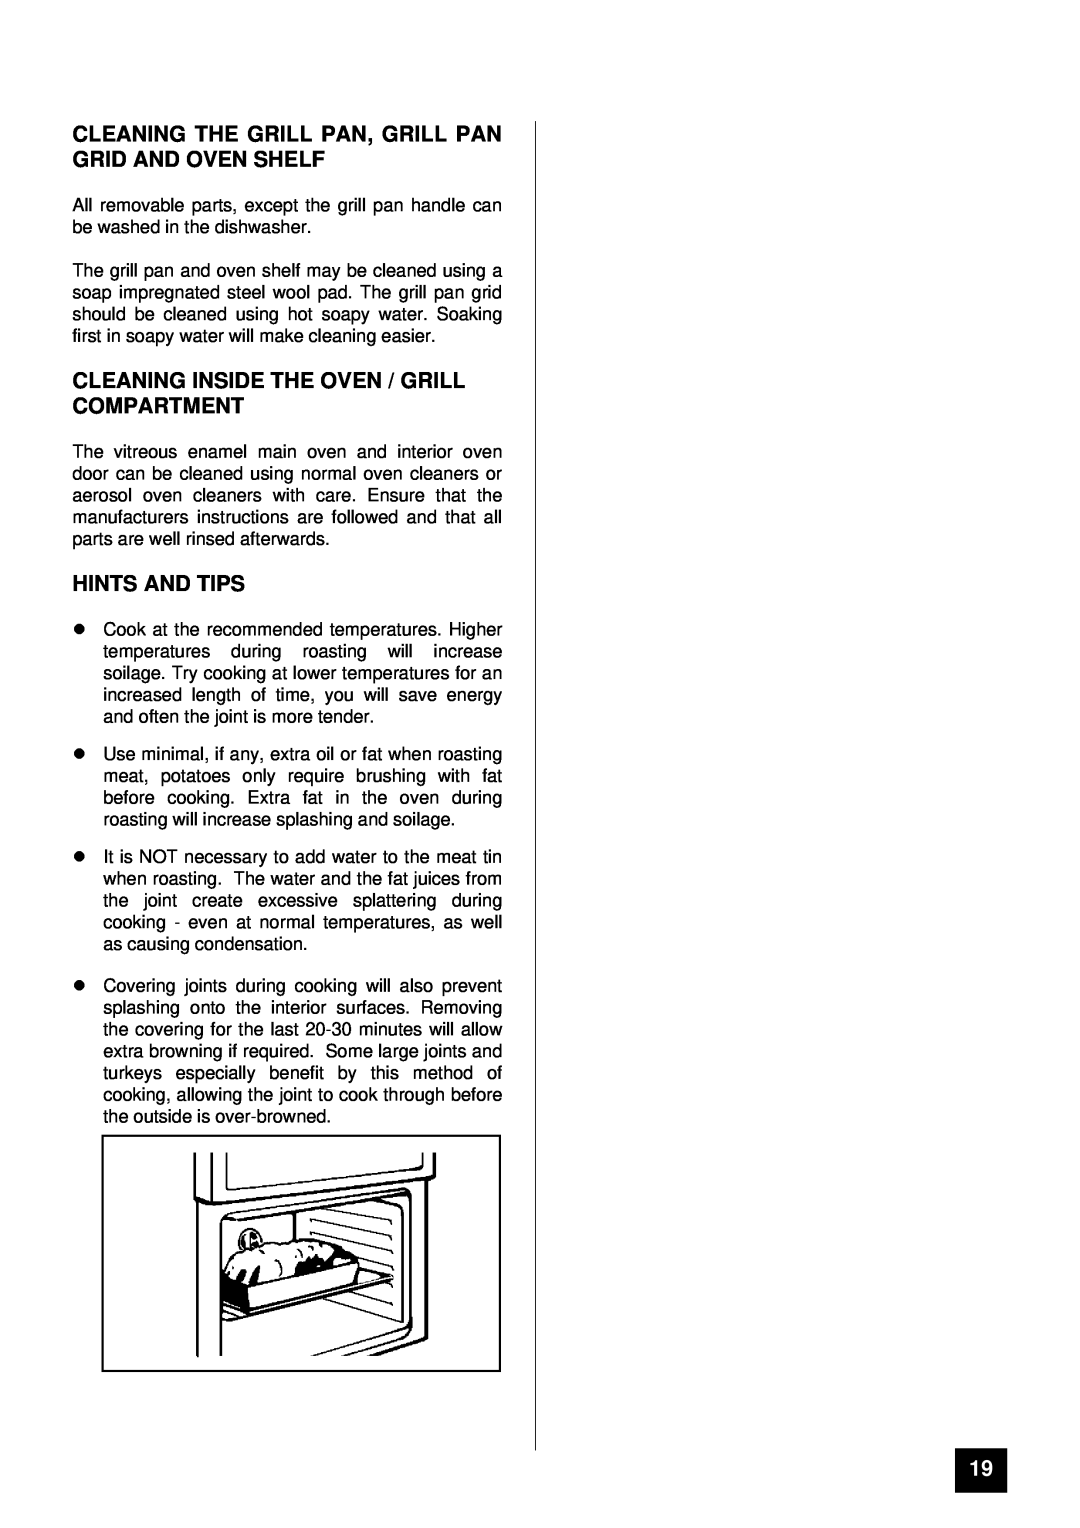 Tricity Bendix RSE50M installation instructions Cleaning Inside The Oven / Grill Compartment, Hints And Tips 